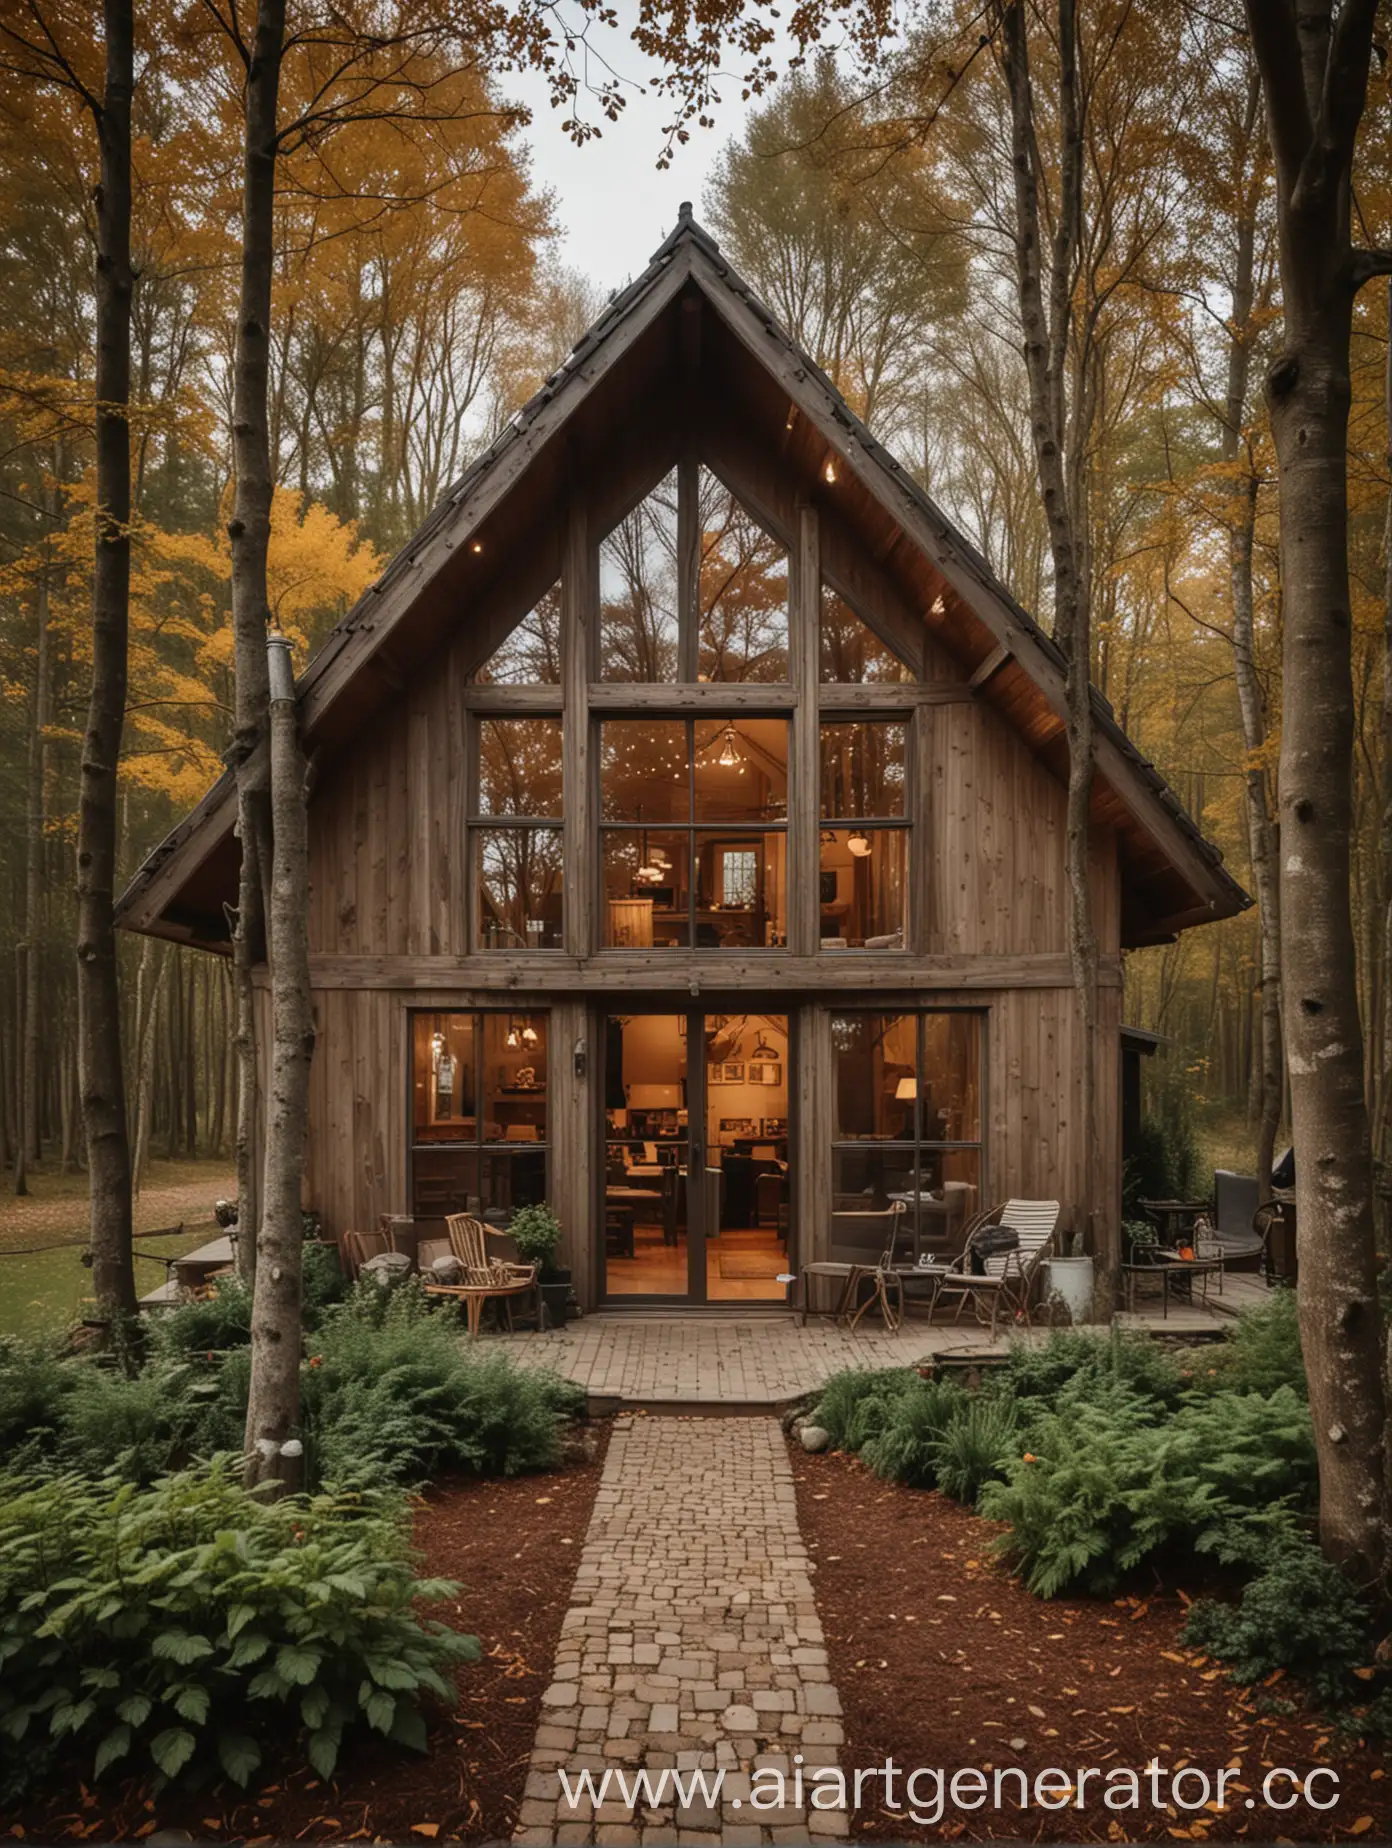 Cozy-BarnHouse-Surrounded-by-Trees-Warm-and-Joyful-Home